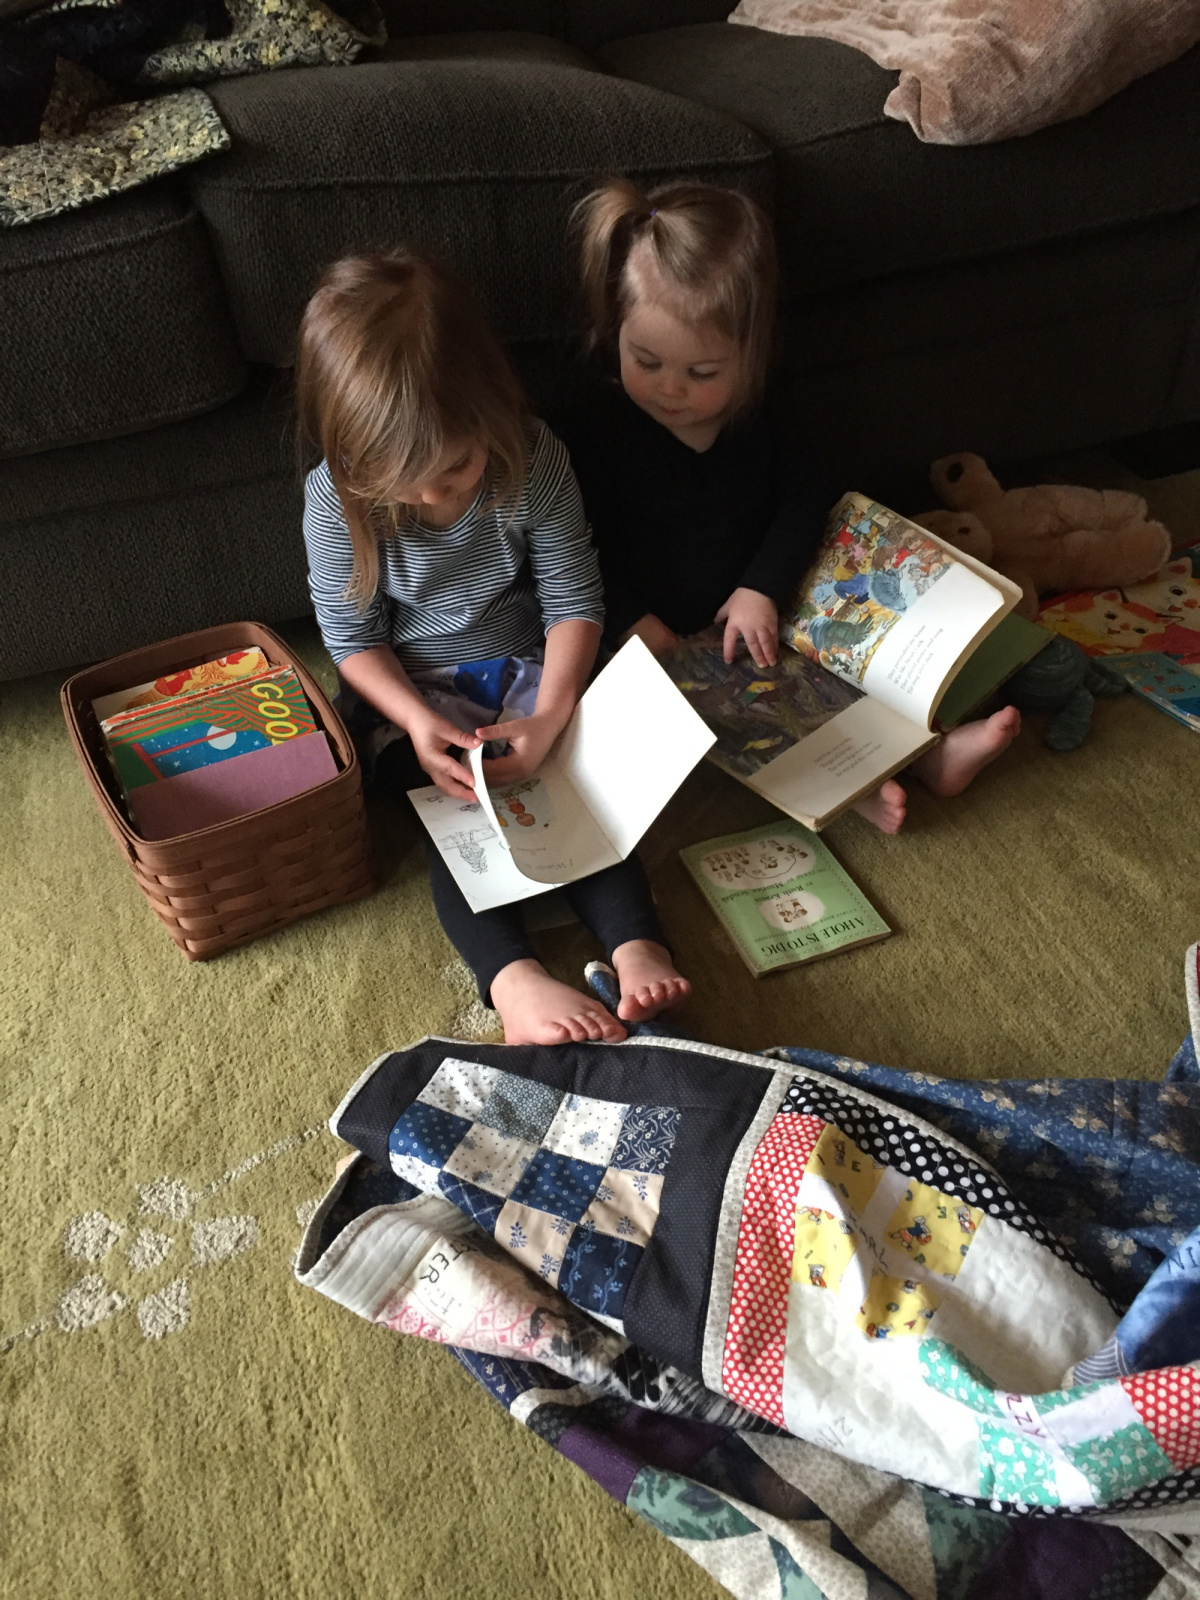 Getting in some last minute reading. These girls love the quilts and the books.